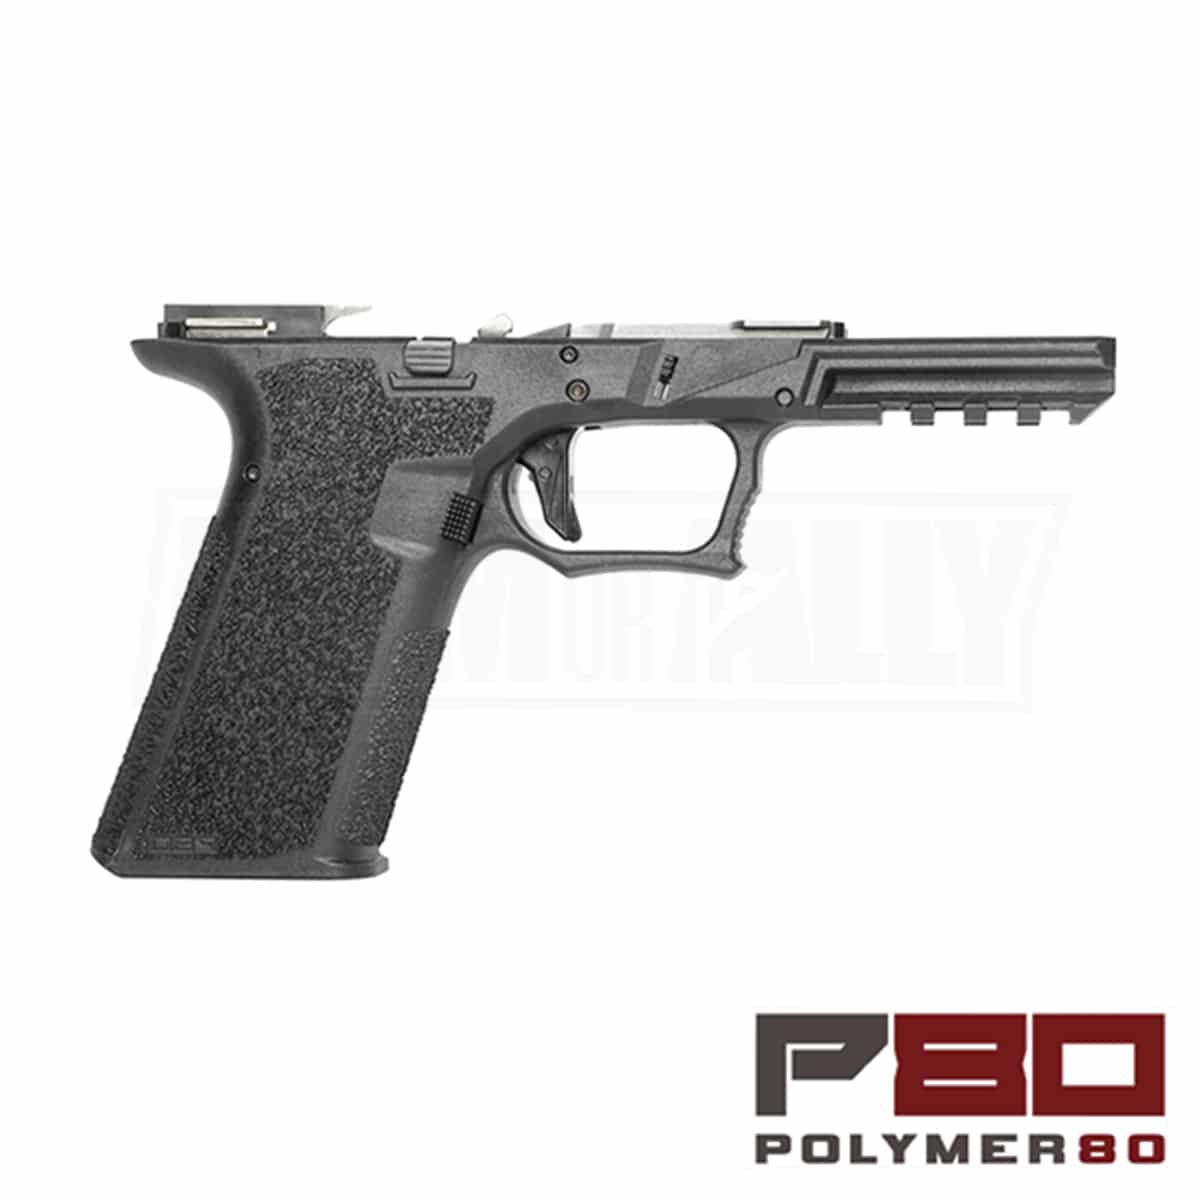 Featured image for “Polymer80 - PFC9 Serialized Compact Pistol Frame”